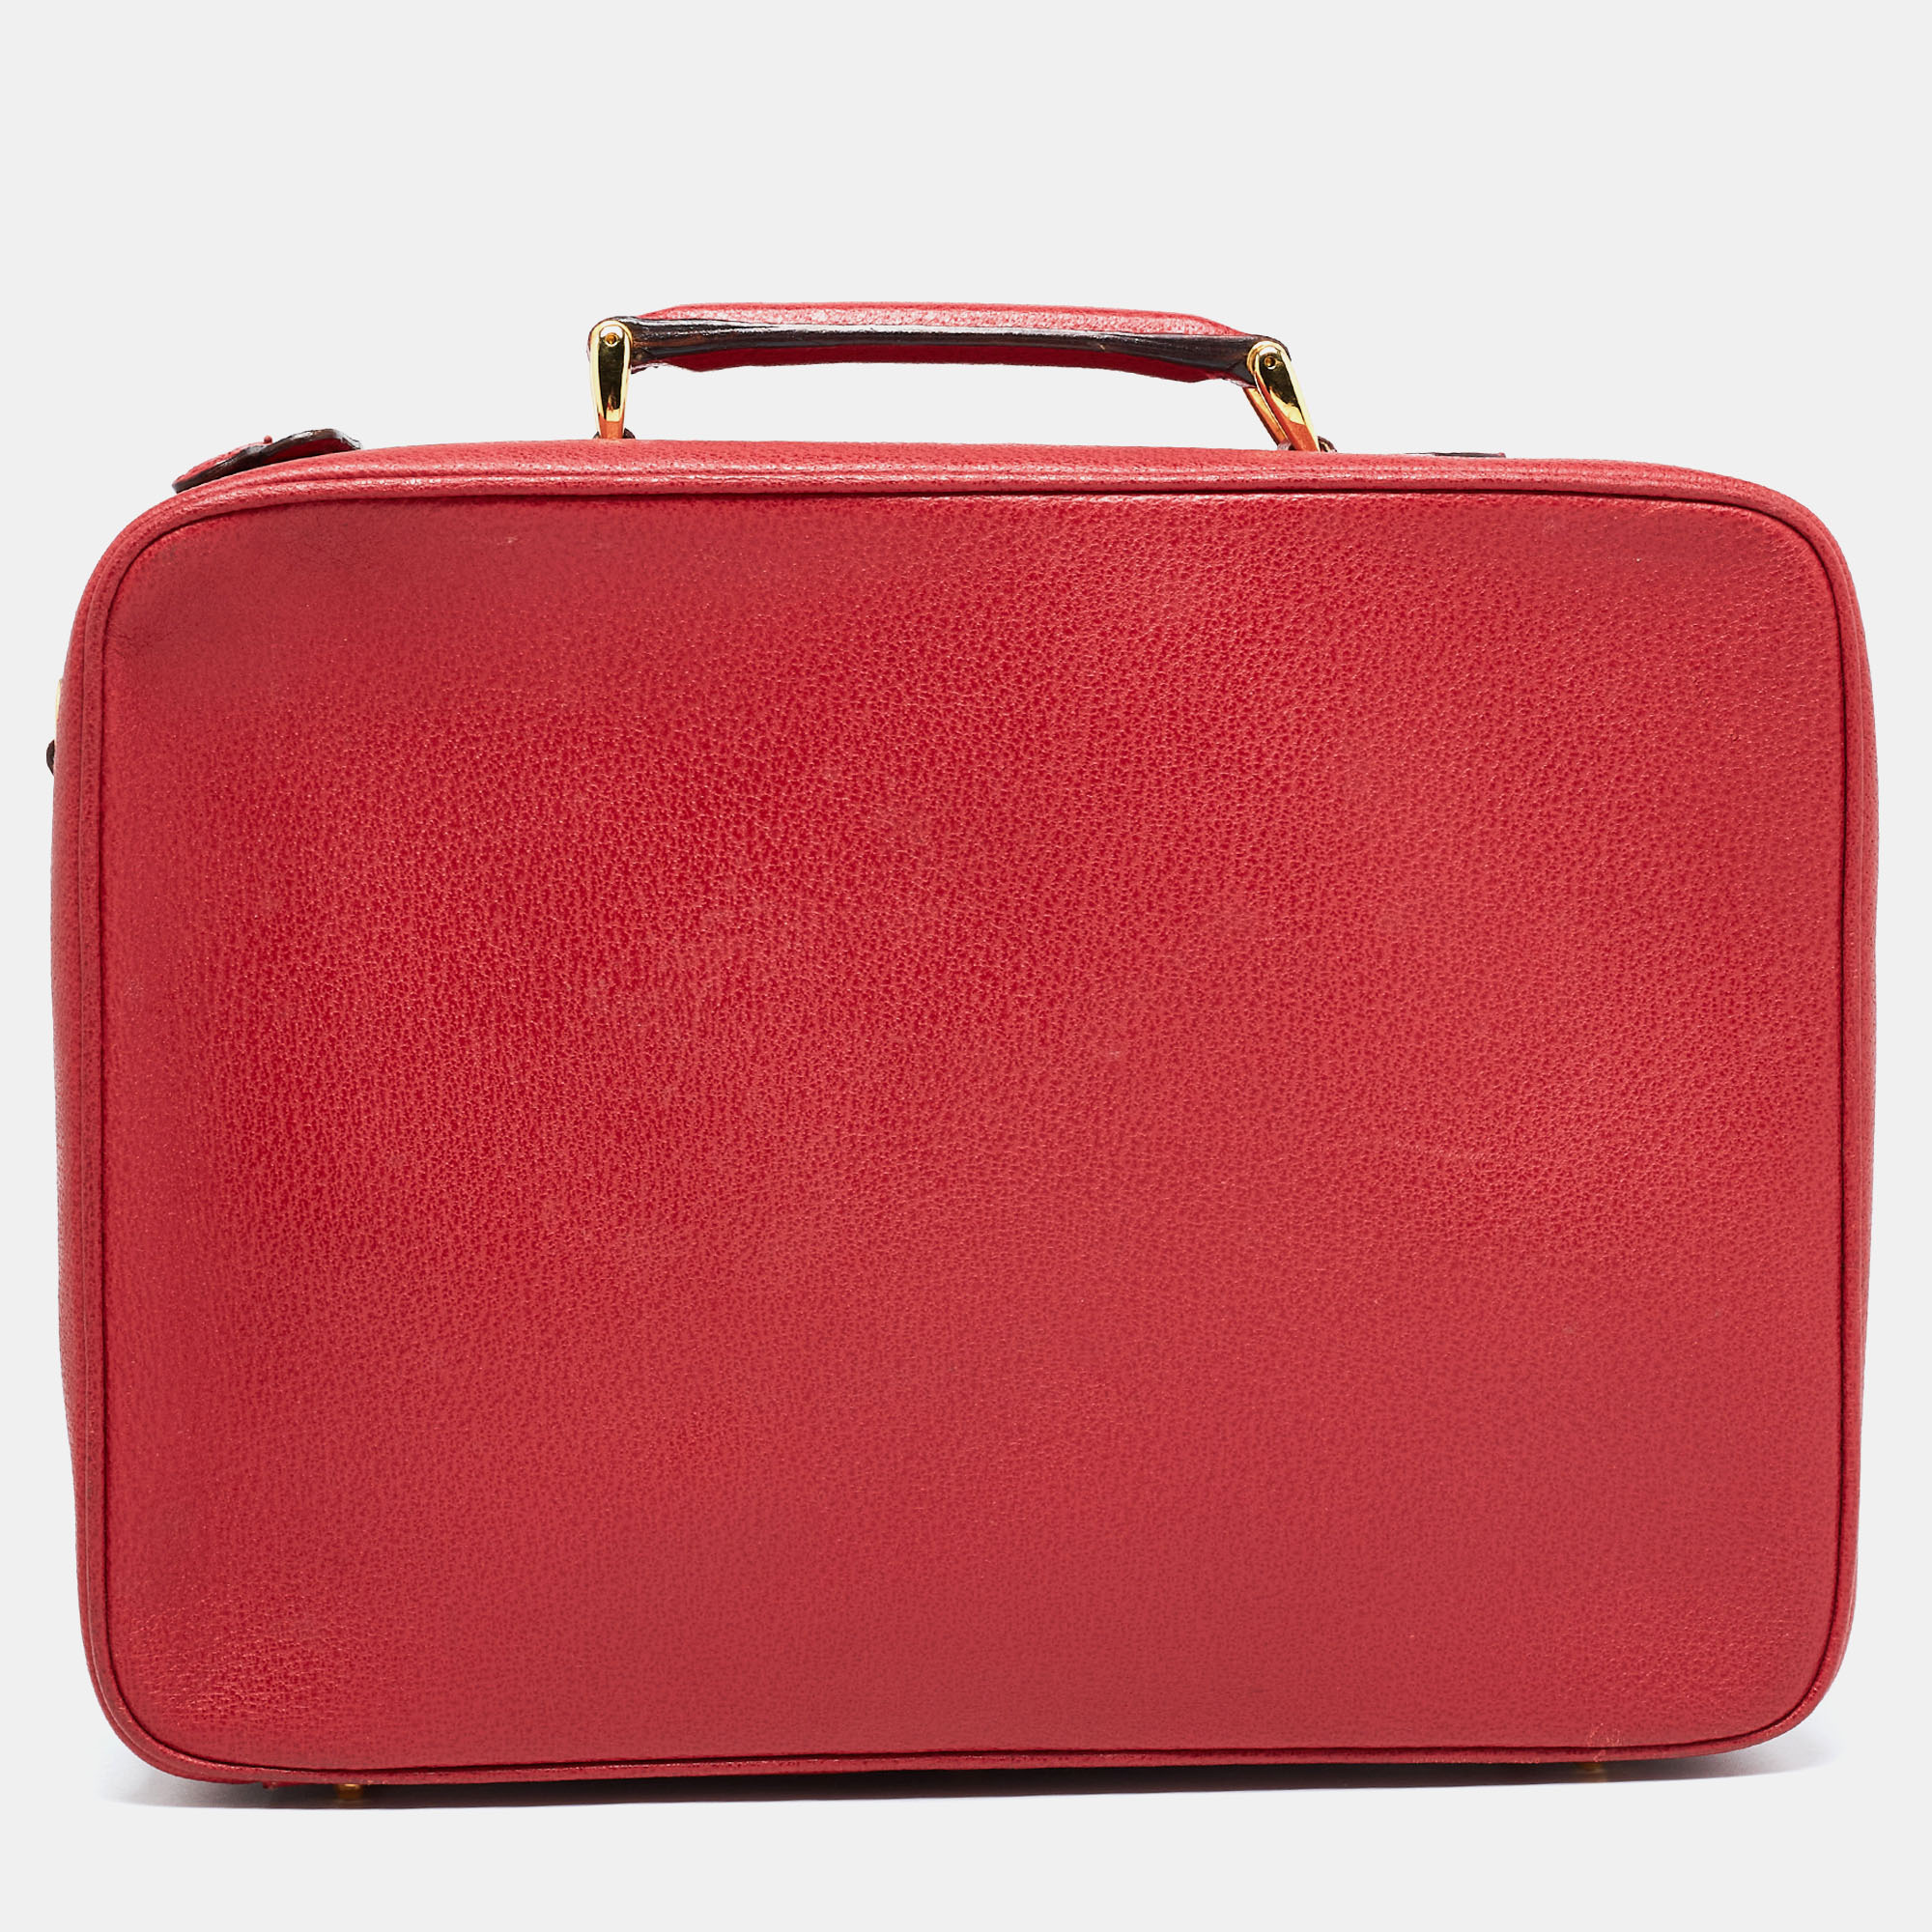 Pre-owned Gucci Red Leather Briefcase Bag